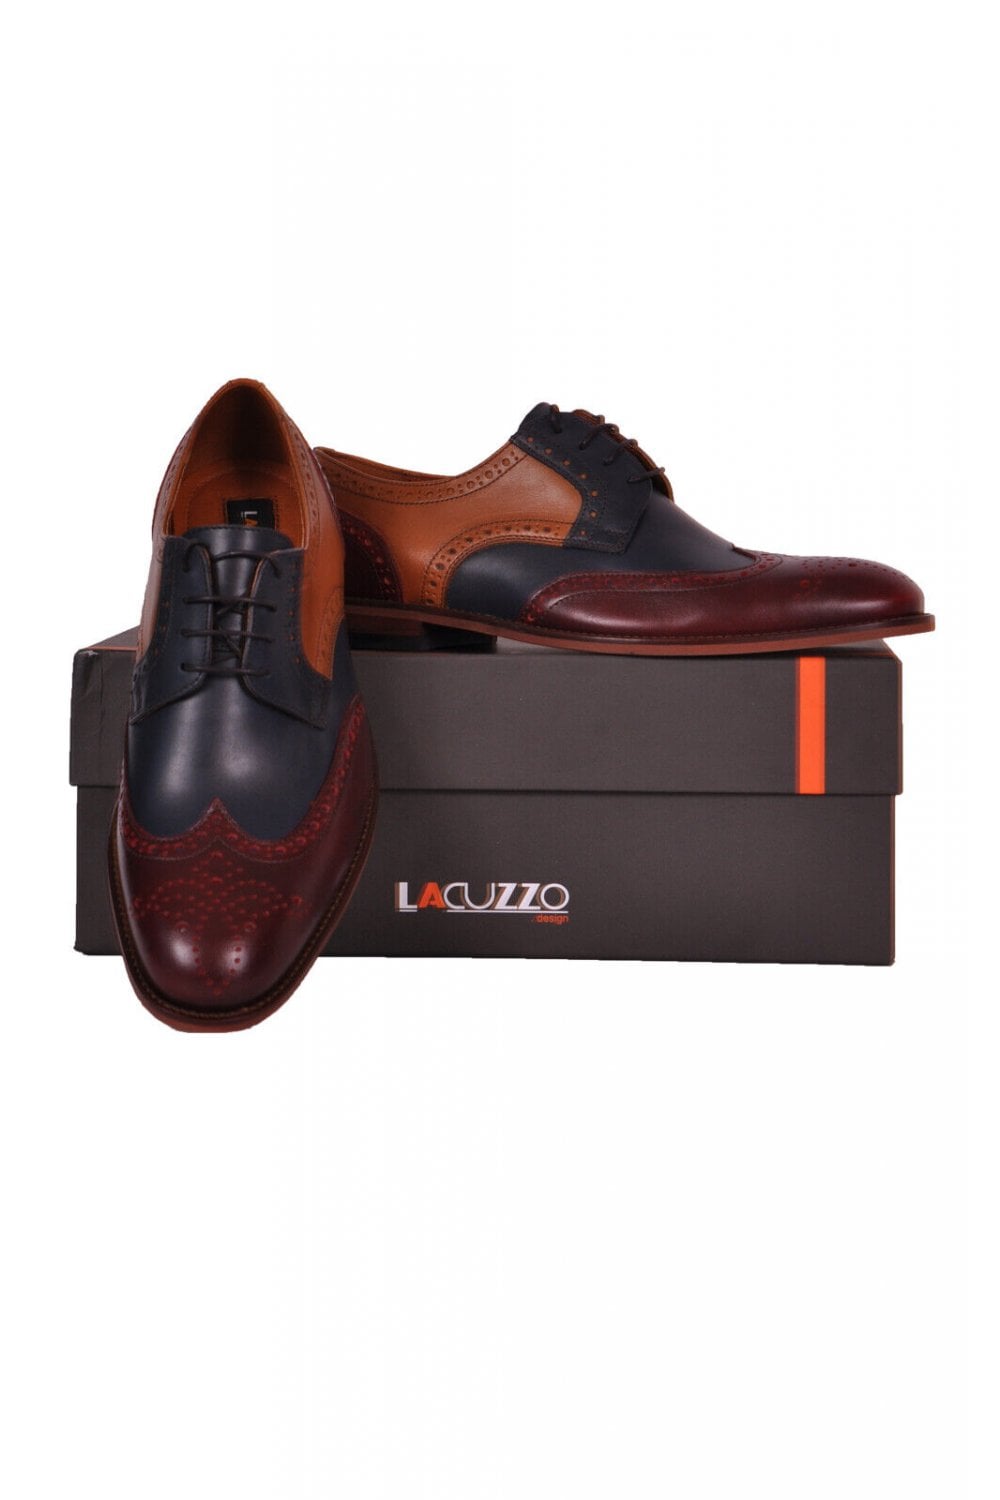 Lacuzzo Contrast Panel Claret Brogues